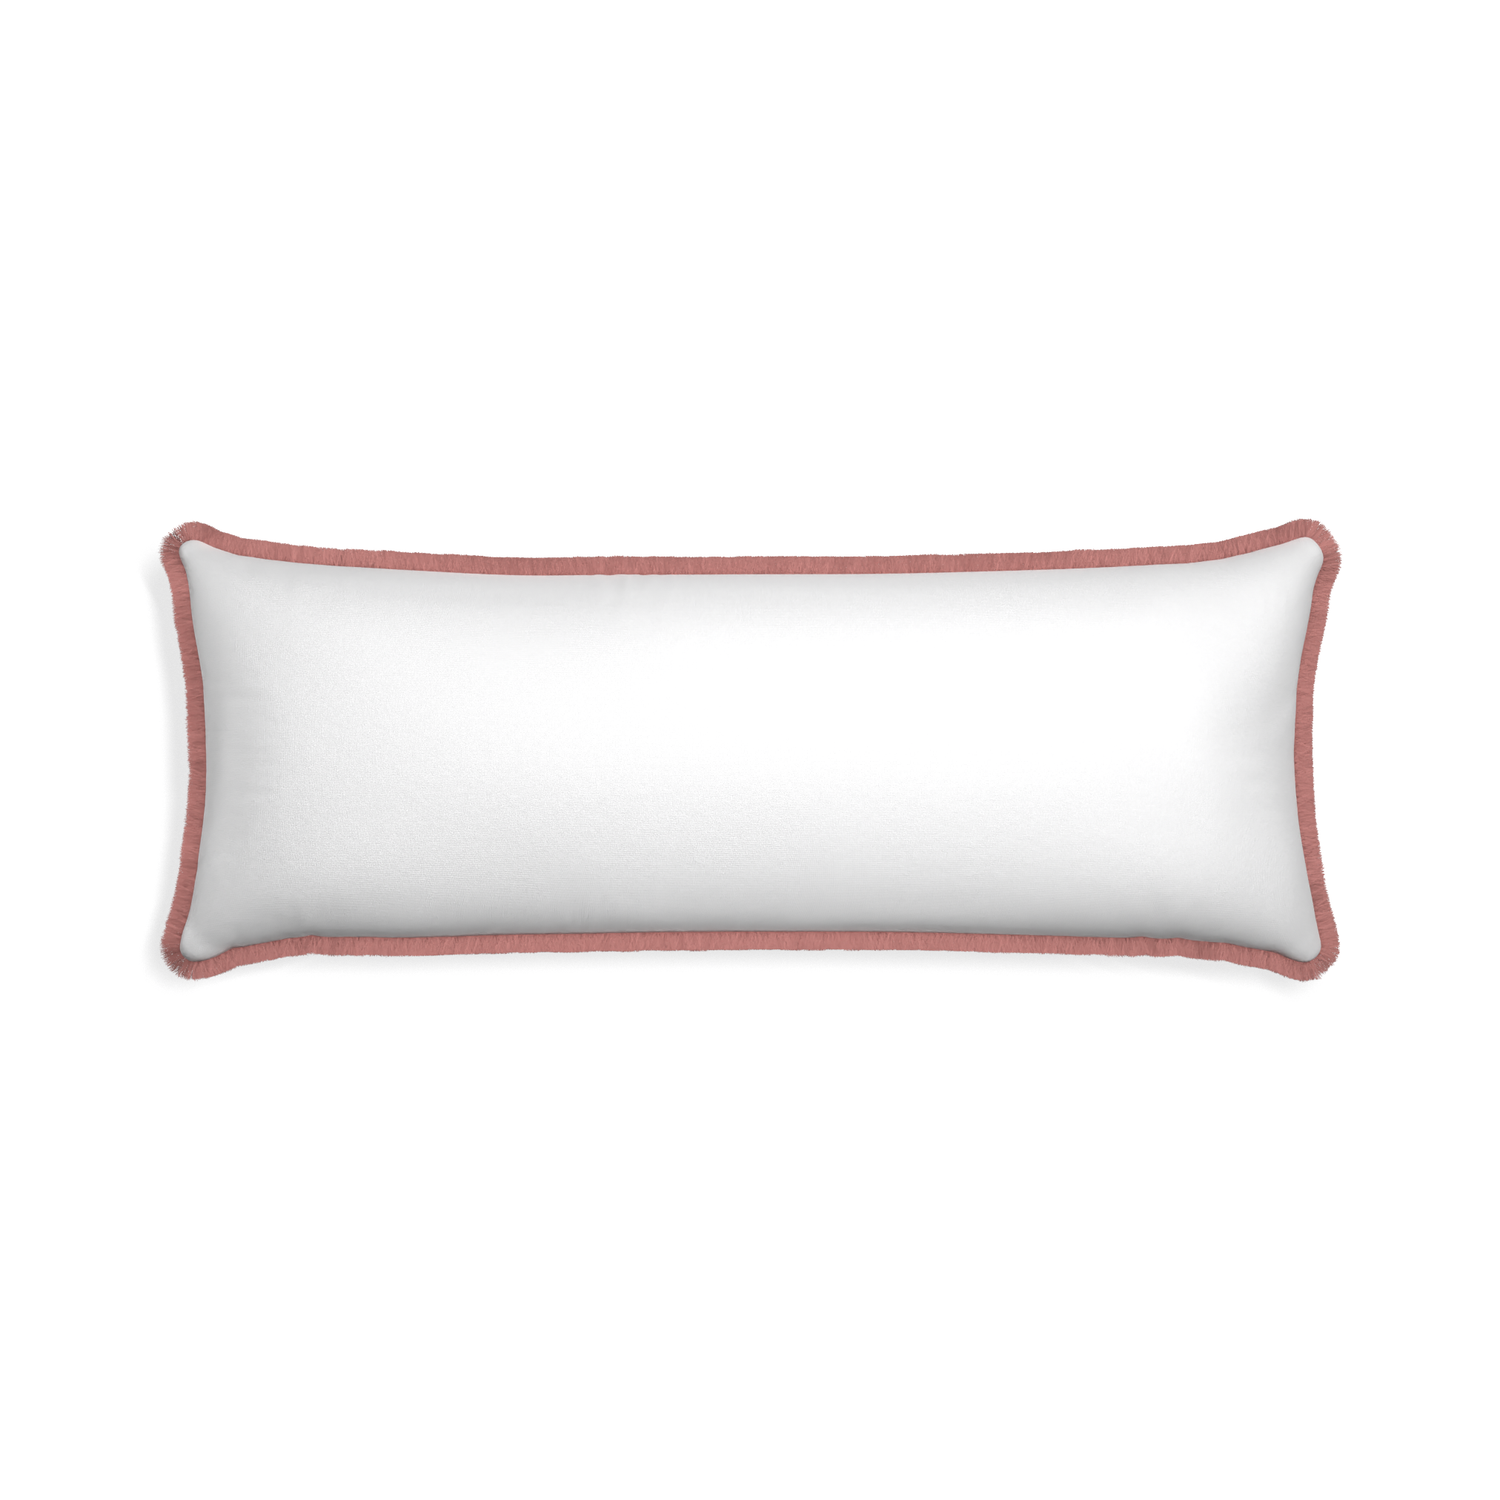 Xl-lumbar snow custom pillow with d fringe on white background